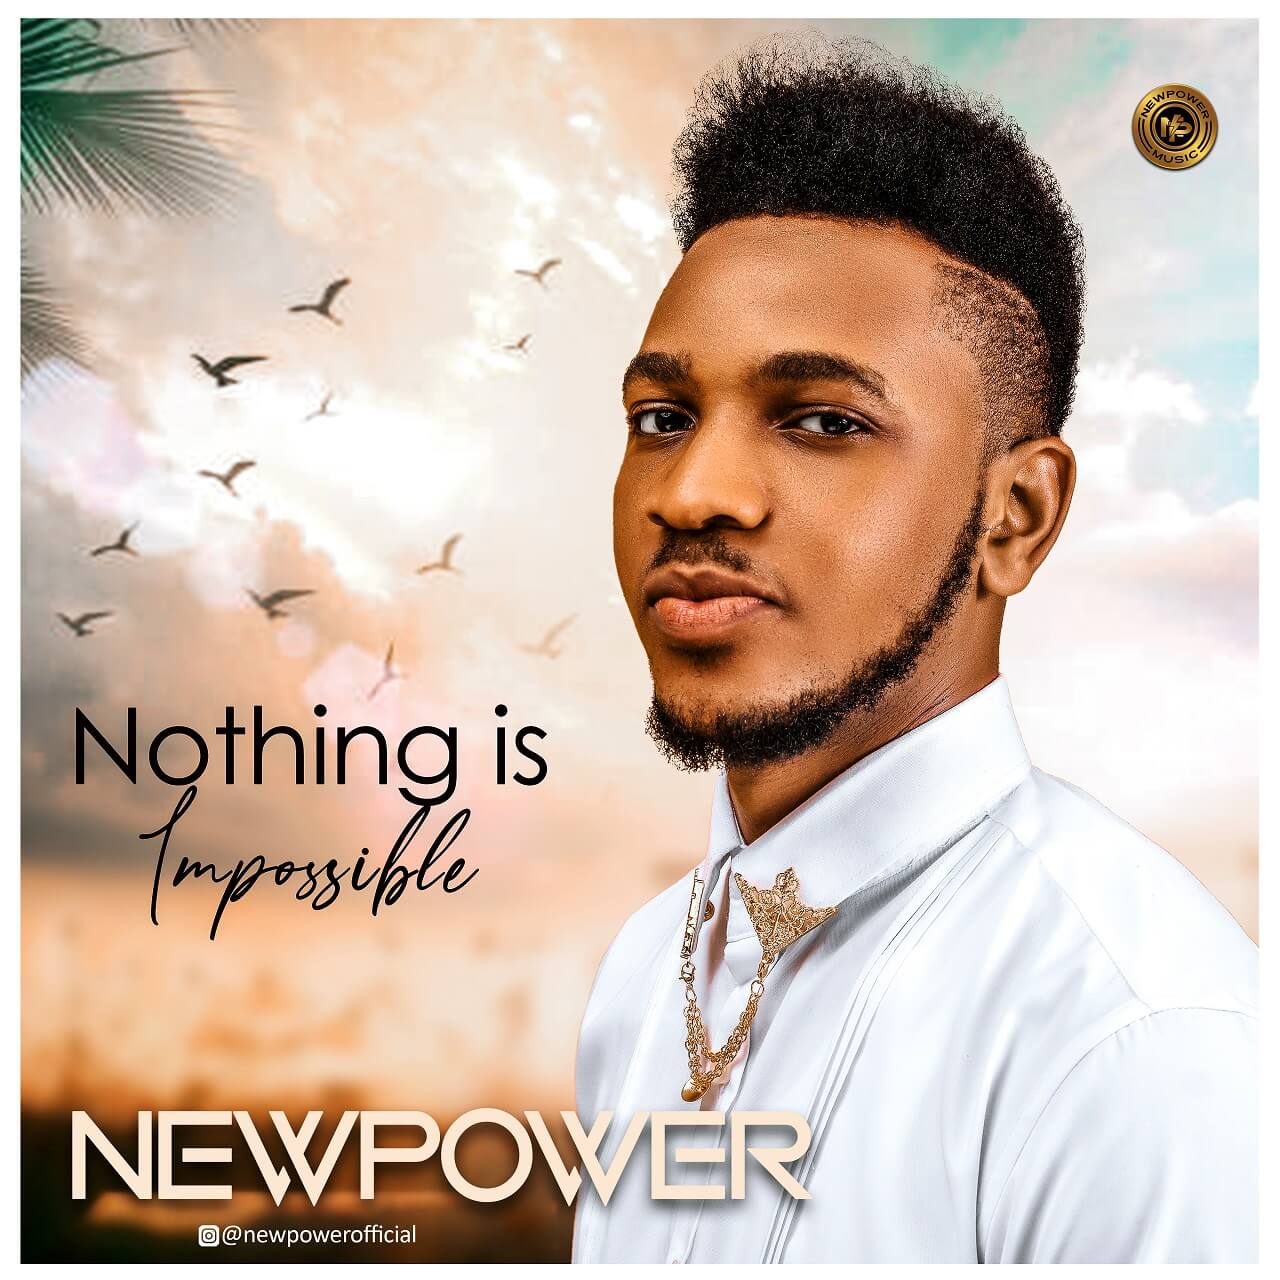 Newpower-Nothing-Is-Impossible